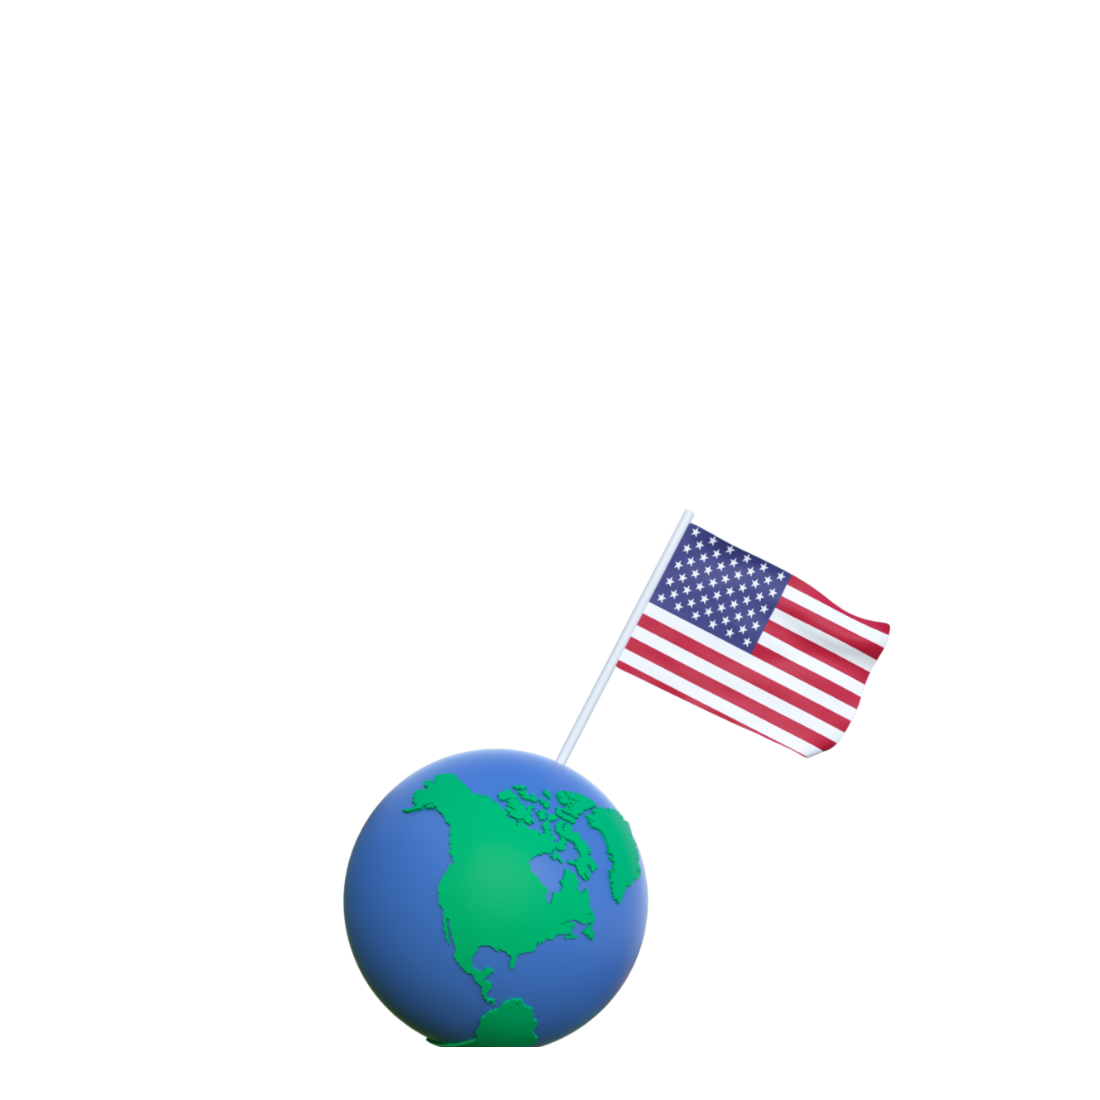 17-1_USA_flag_x2_banner(수정)2.png